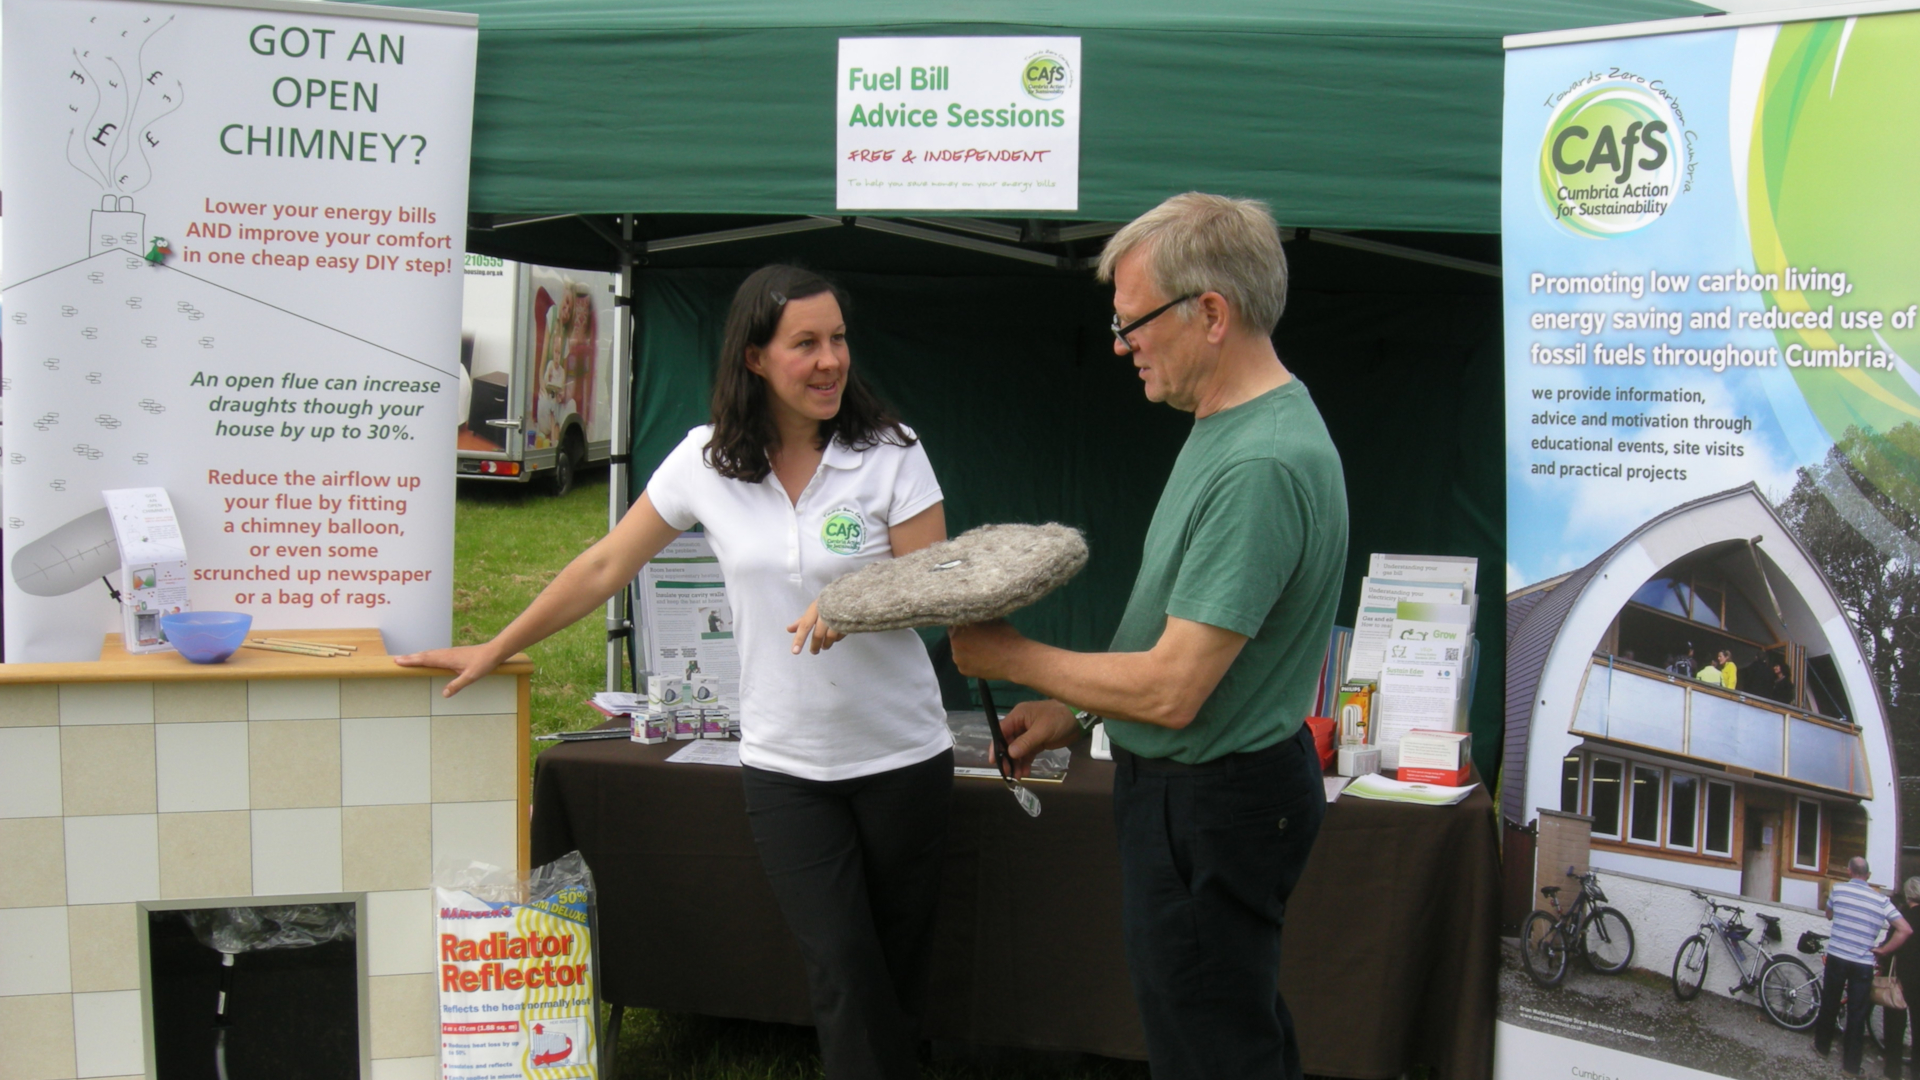 CAfS chief executive Hazel Graham offers advice on blocking chimney draughts using a Chimney Sheep, at a stall at an event